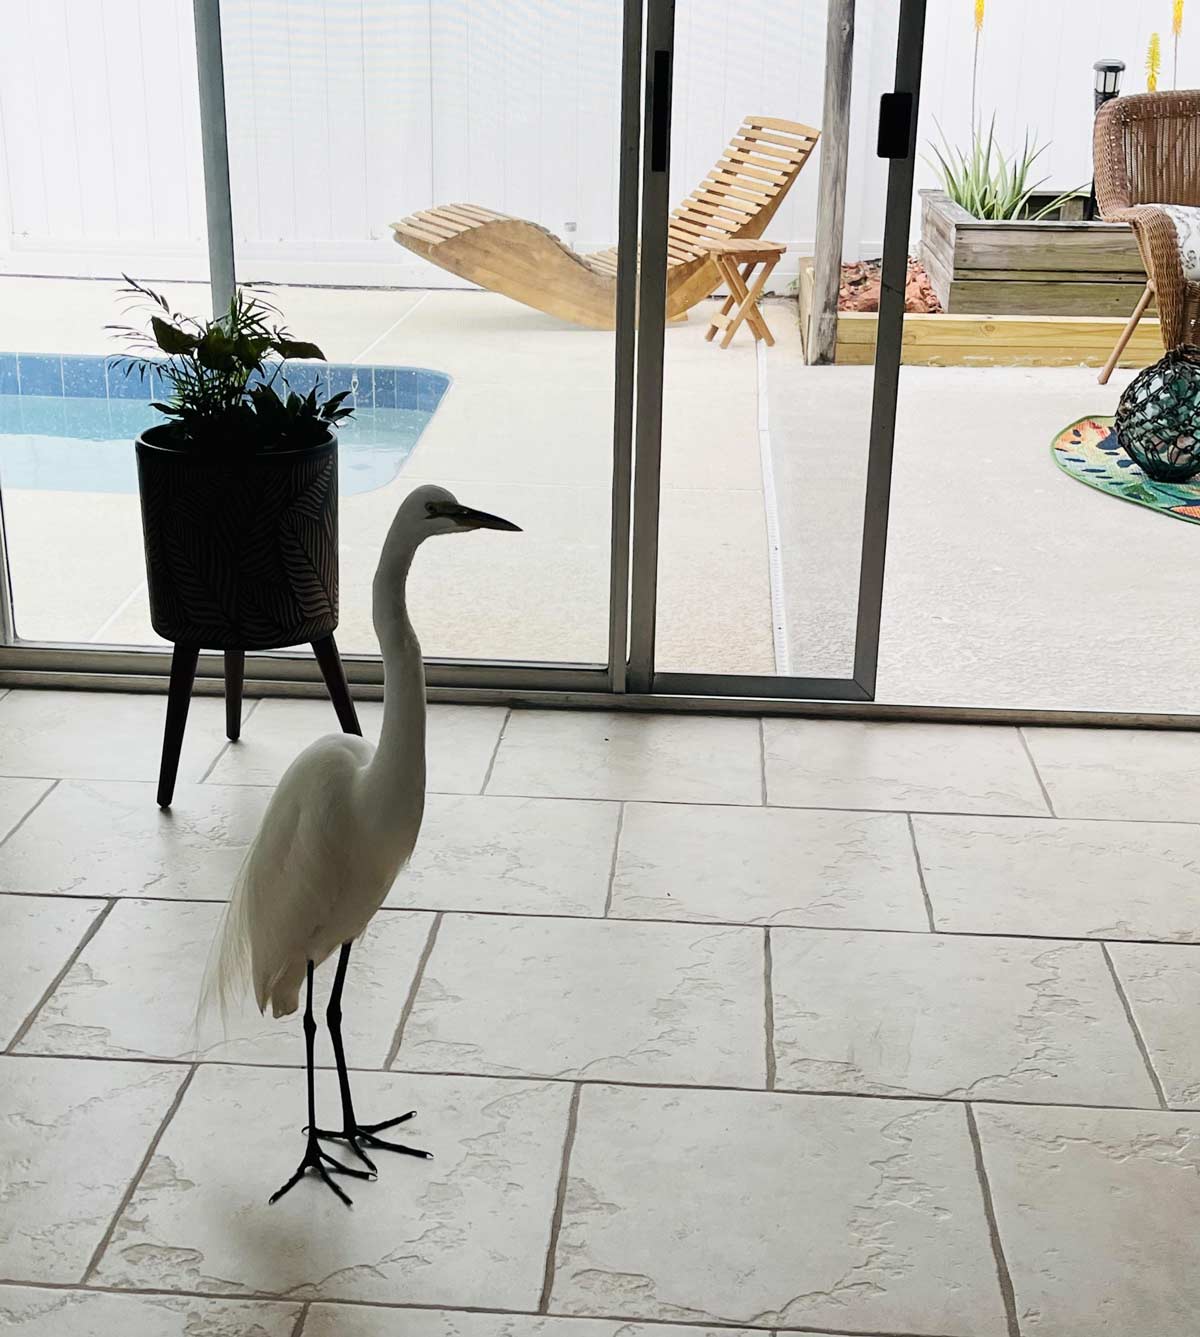 I just moved in this house and there is a great egret who just comes in the house!